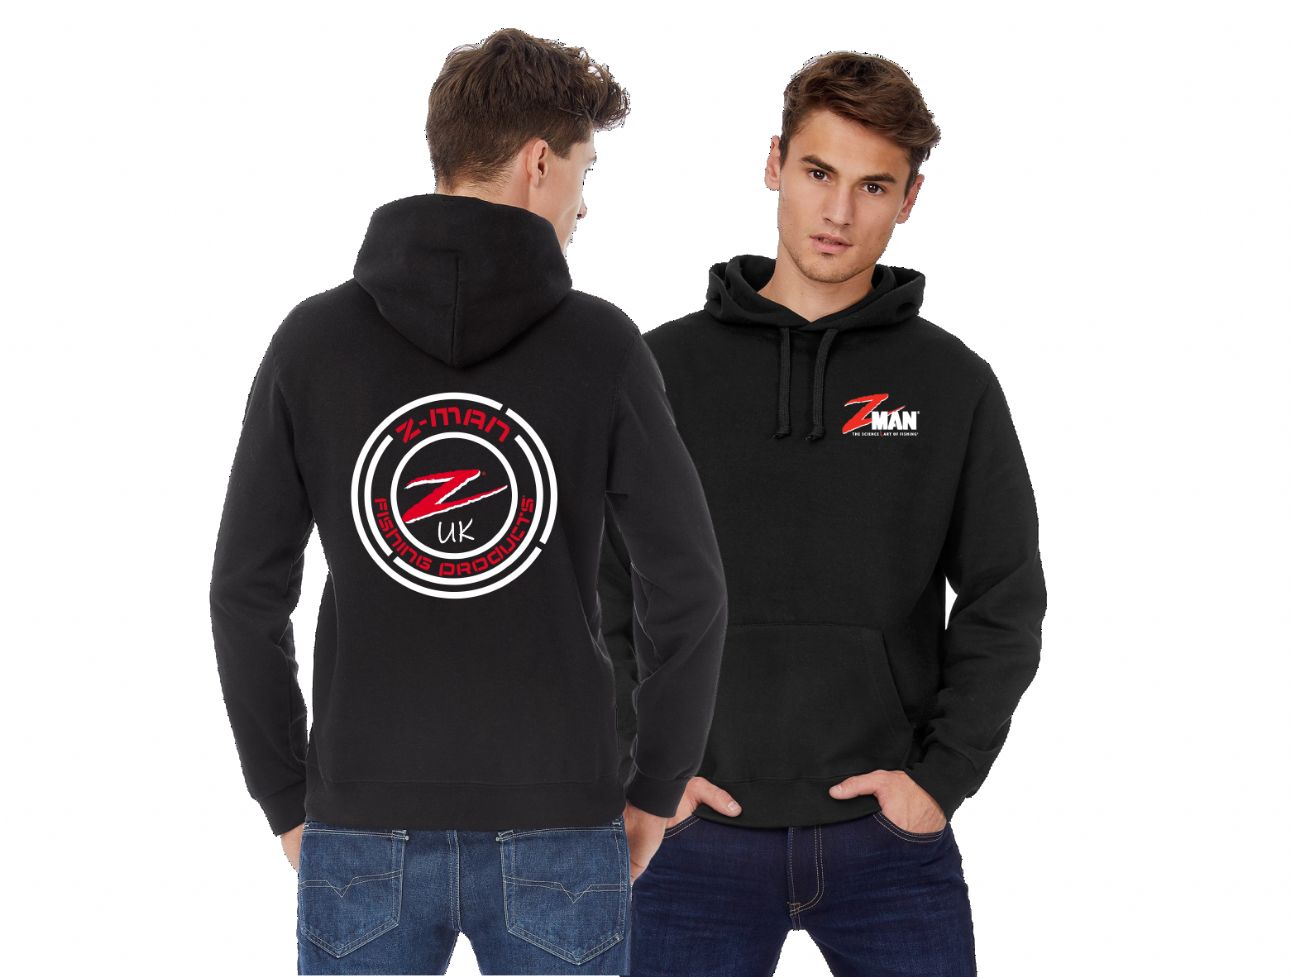 https://www.predatortackle.co.uk/Clothing/Outer-Wear-Clothing/Z-MAN-UK-Hoodies/ZMAN%20UK%20Hoodies.png